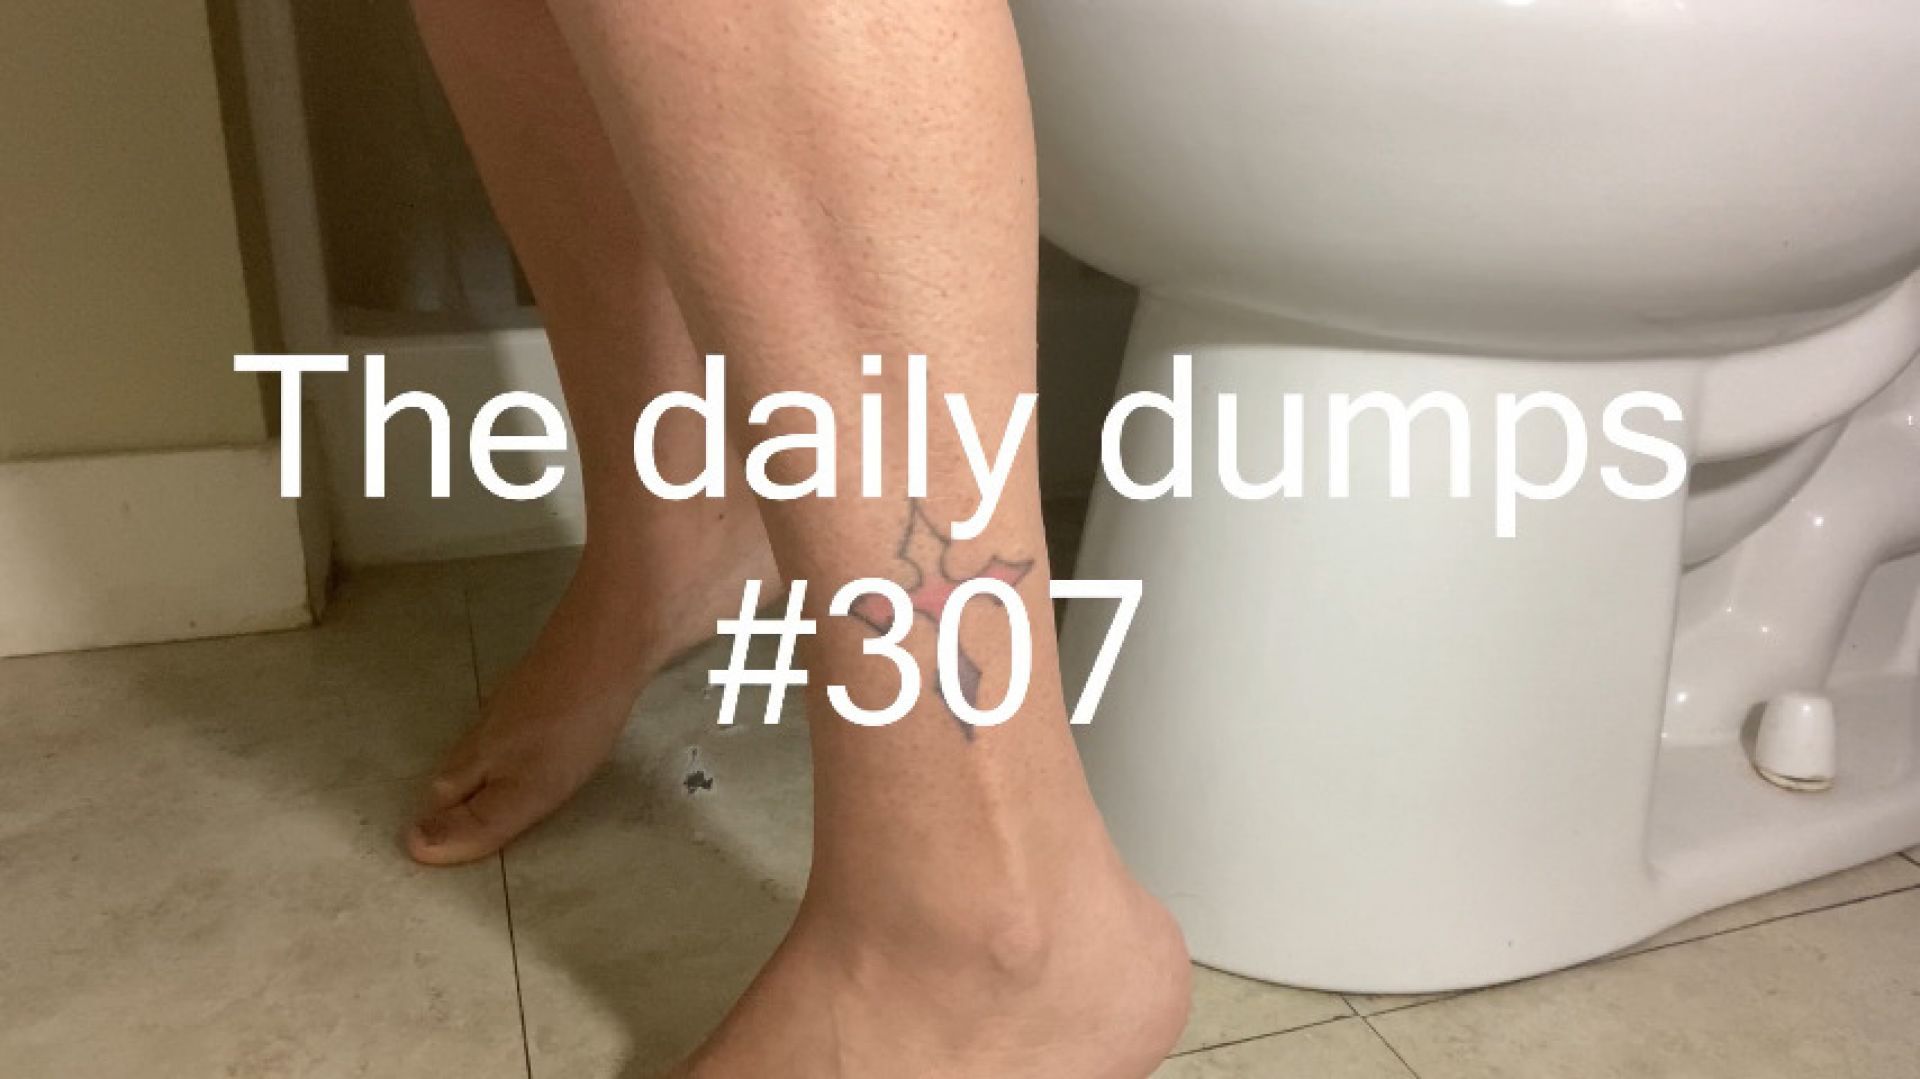 The daily dumps #307